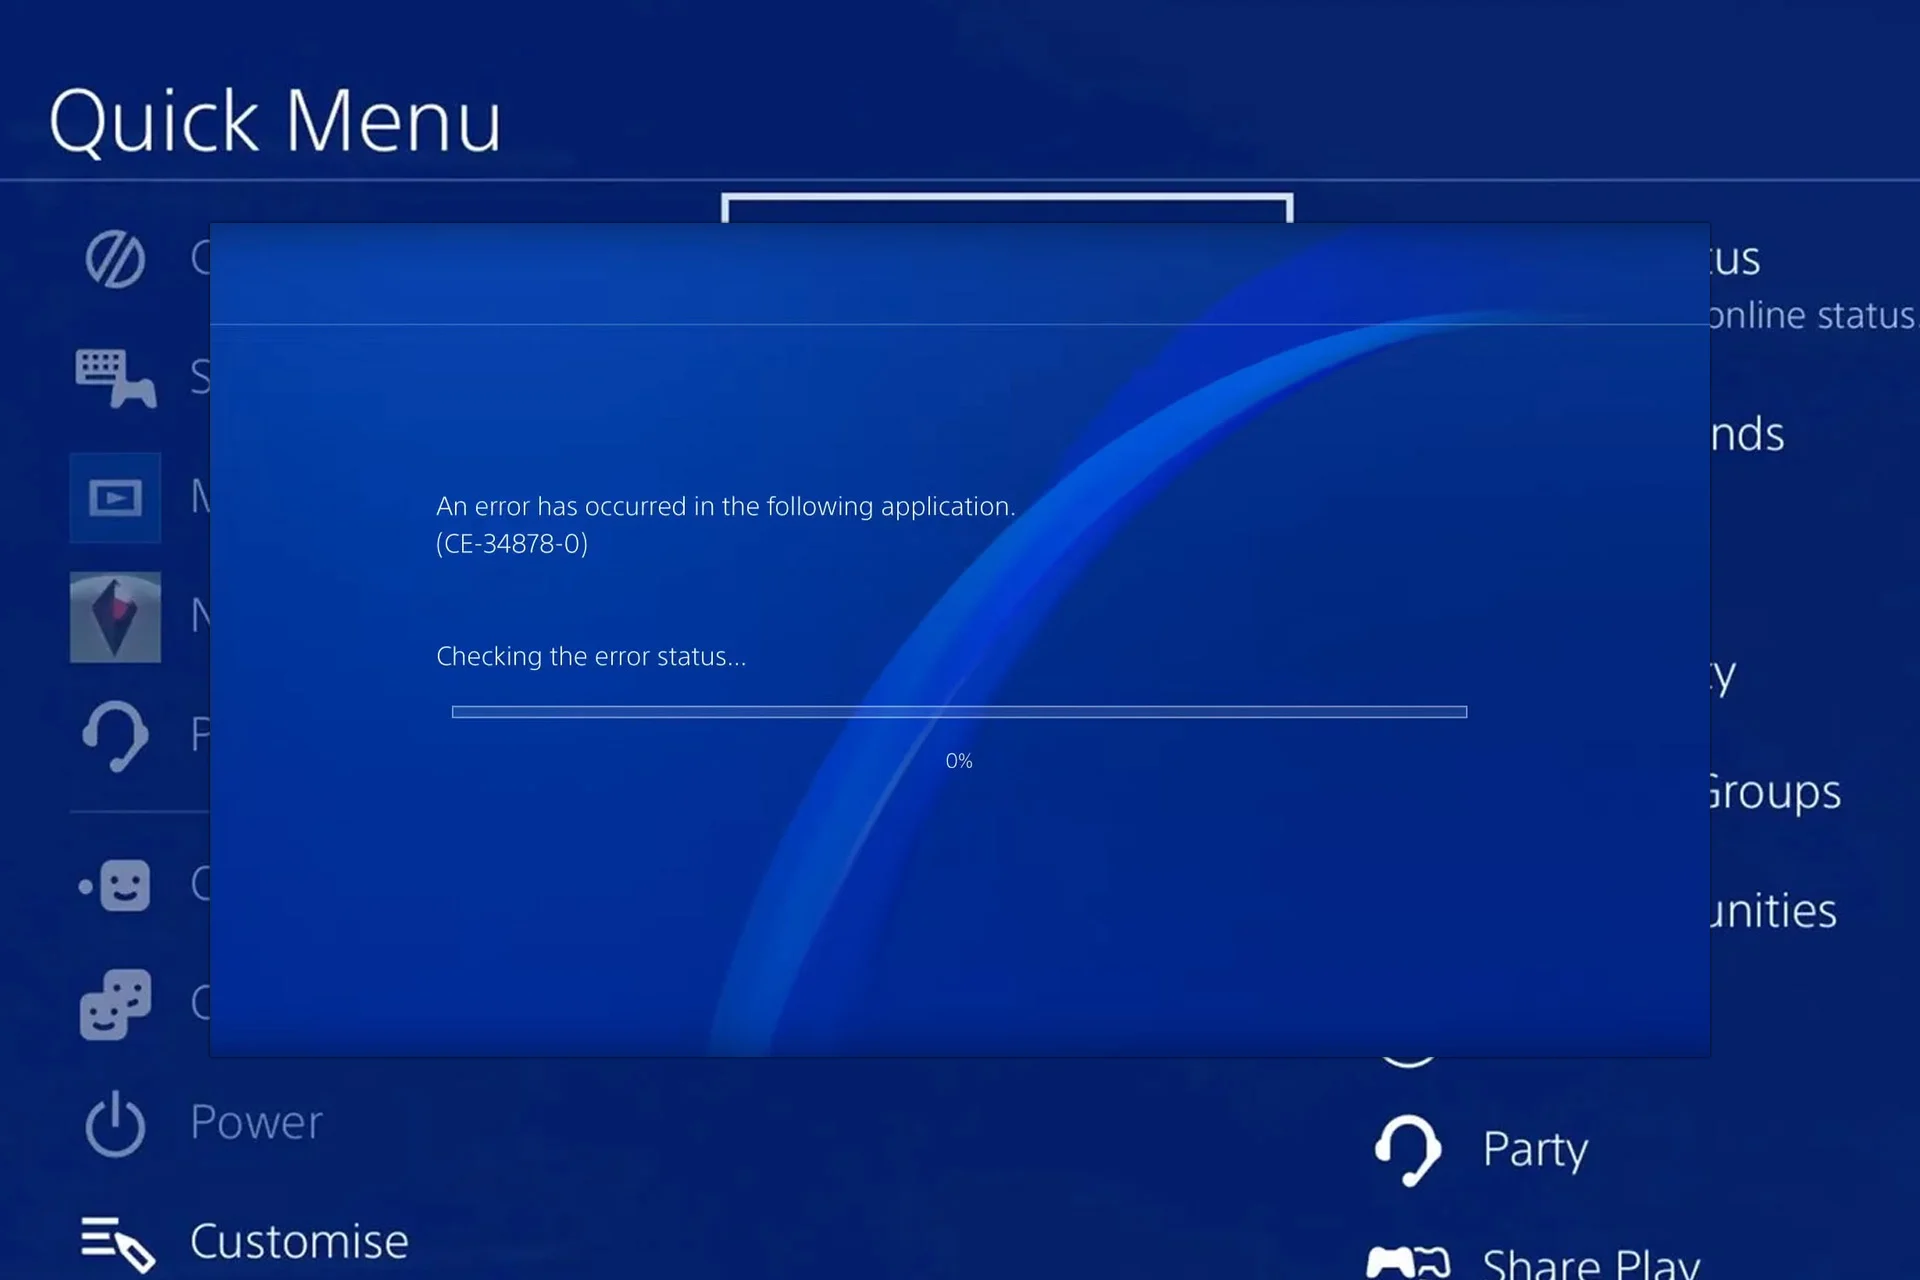 How to Resolve Major Console Errors in PS4